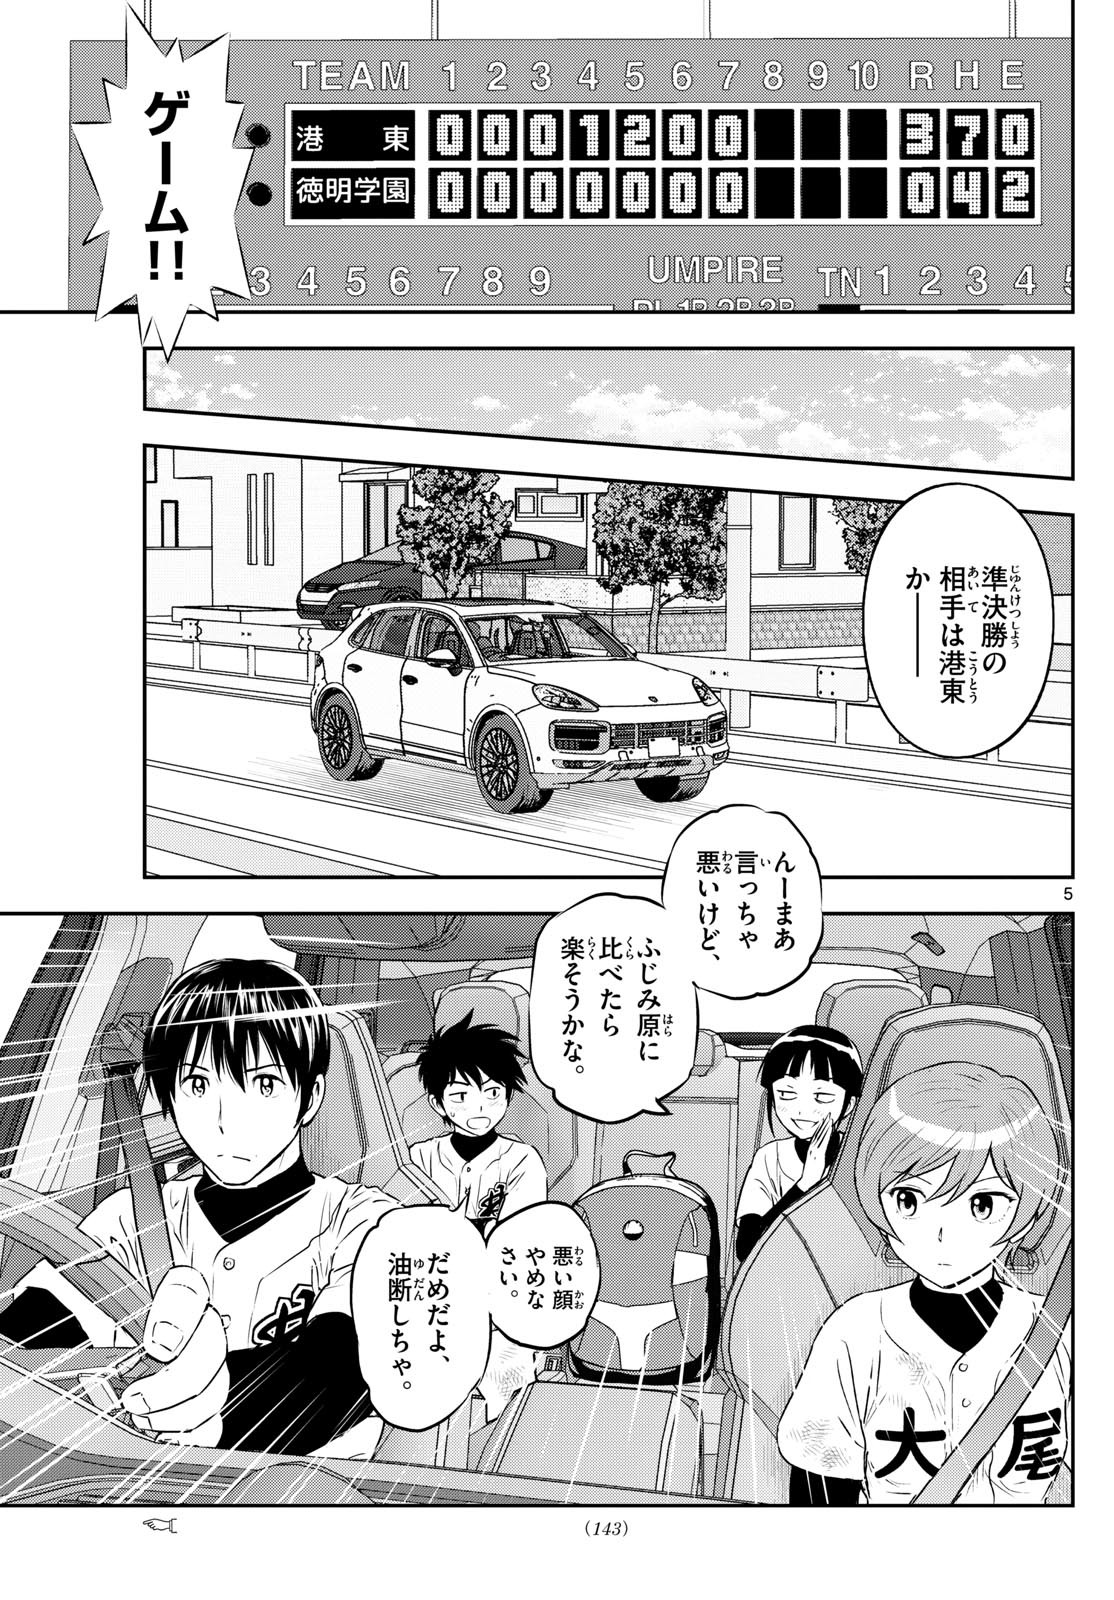 Major 2nd - メジャーセカンド - Chapter 278 - Page 5